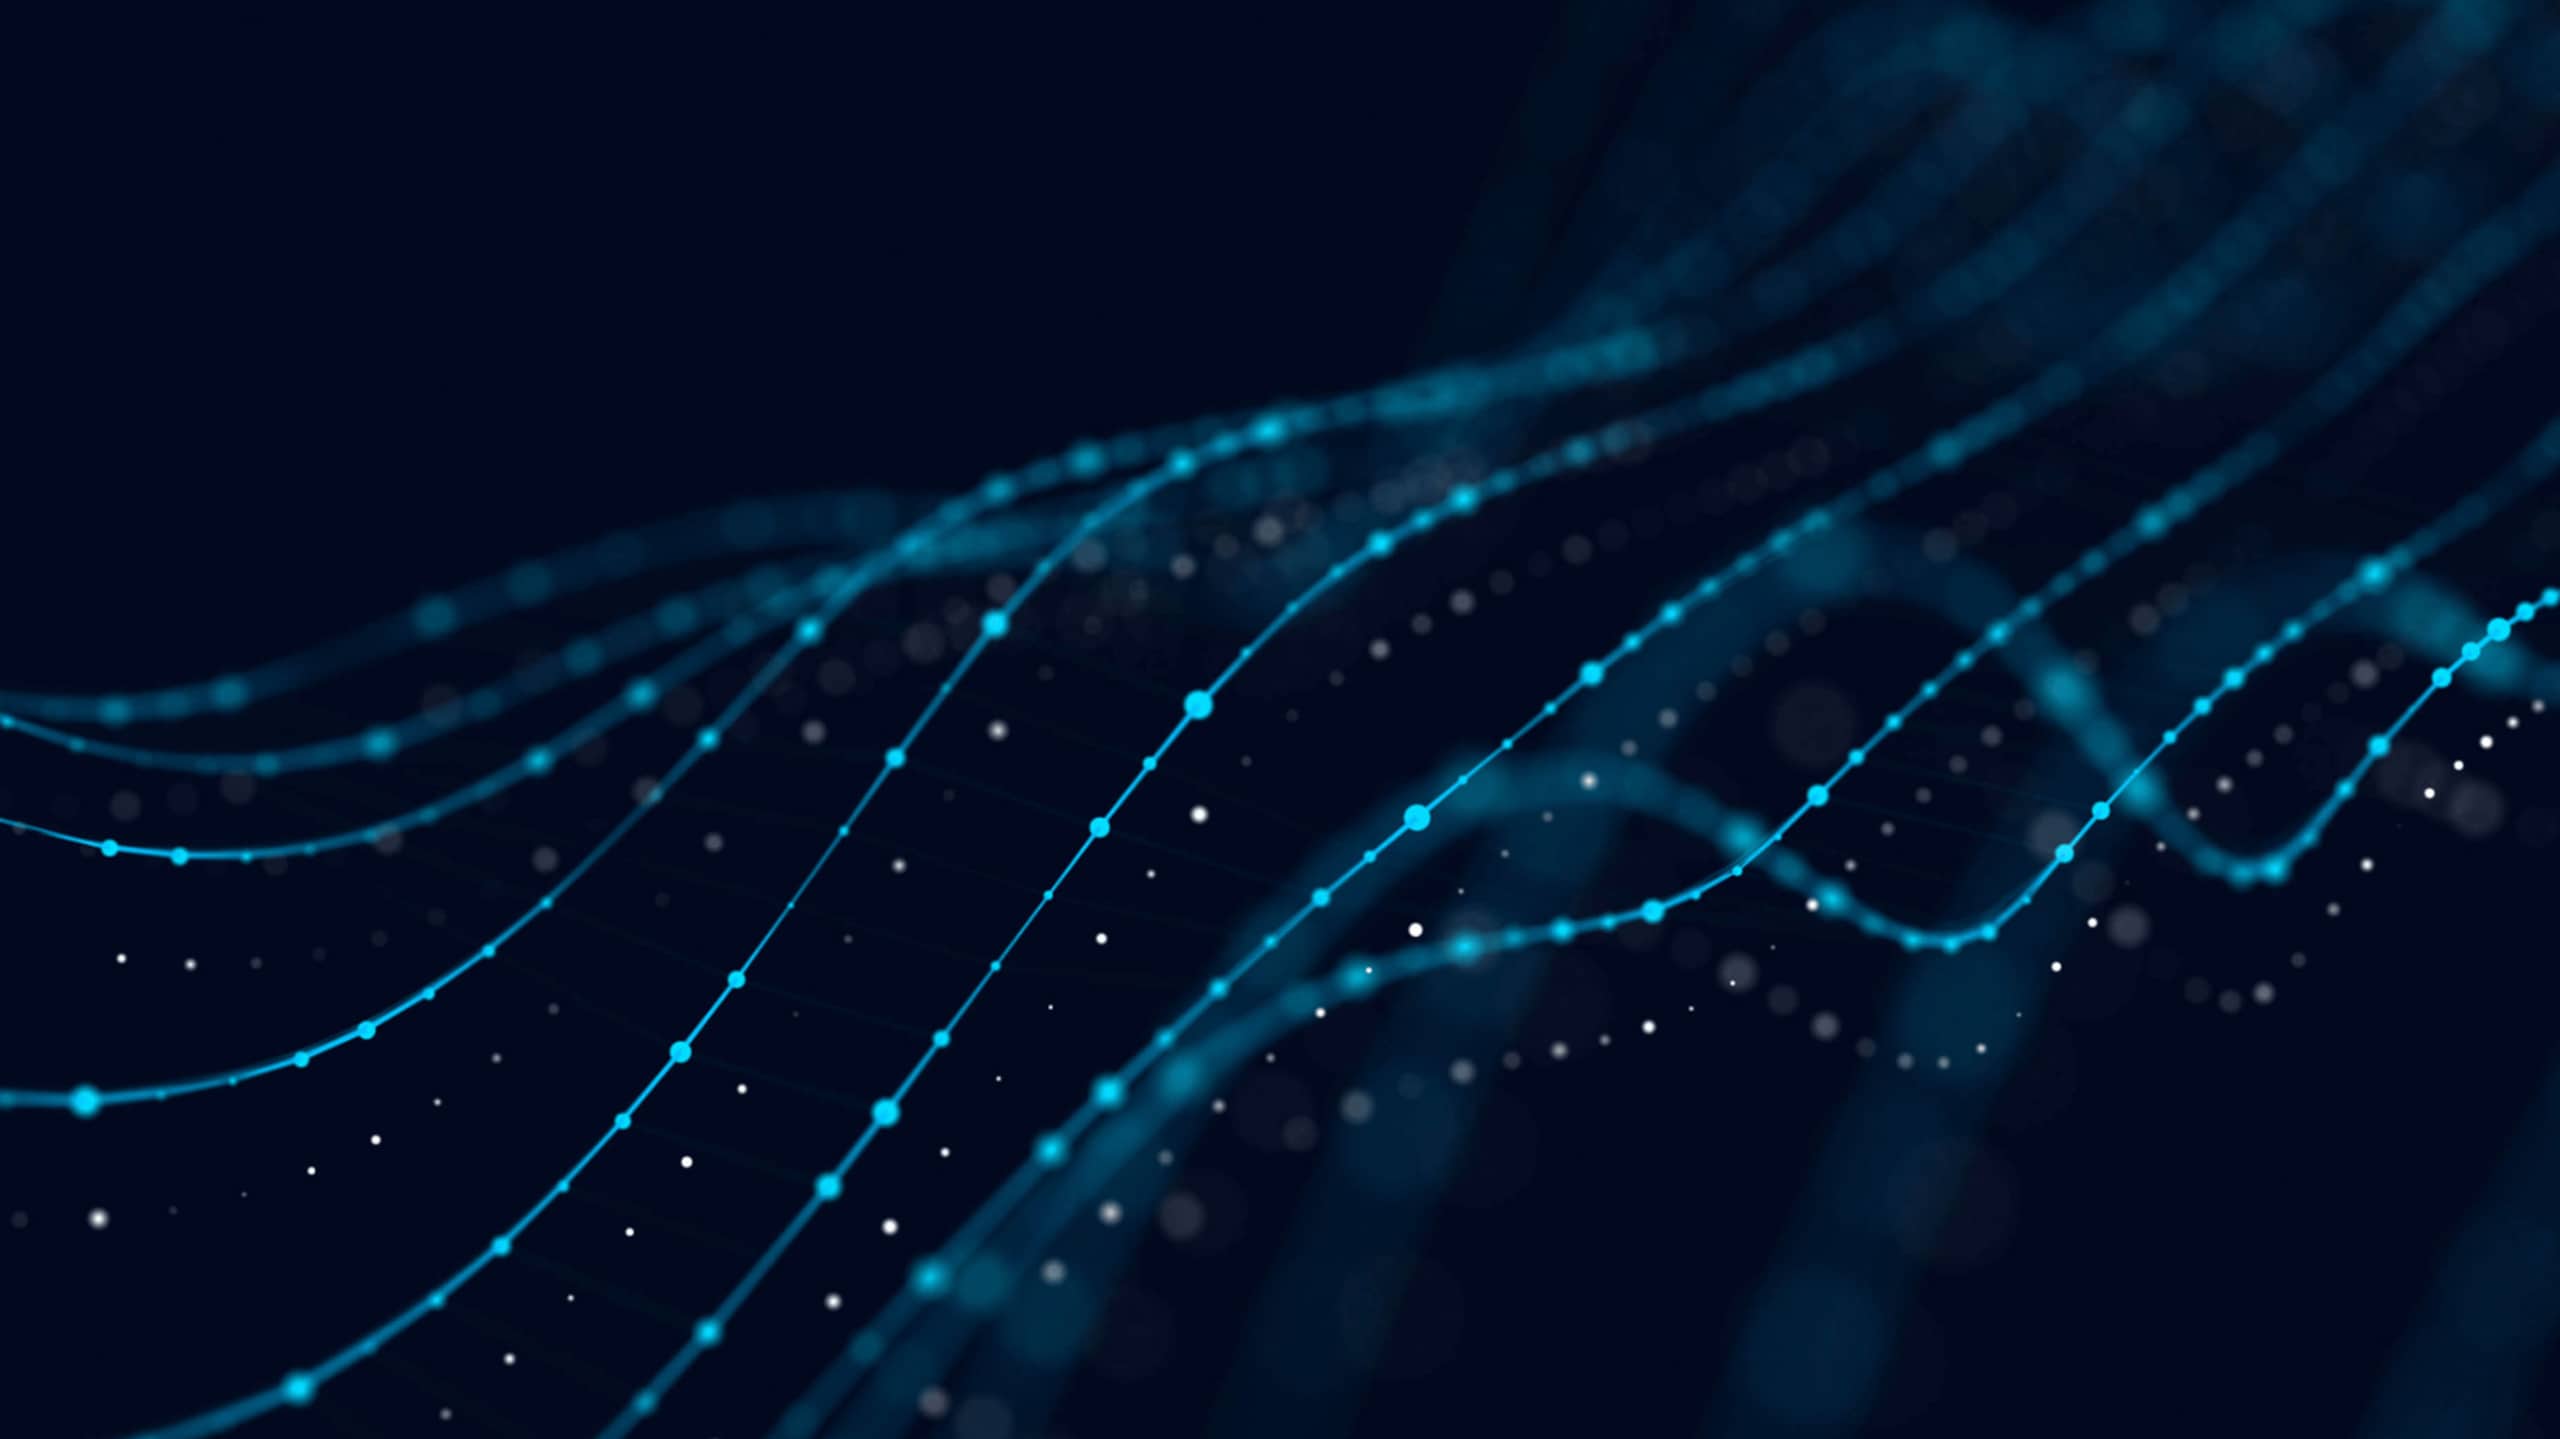 Abstract digital background featuring flowing blue lines with connected dots, representing a network or data stream, against a dark blue backdrop.